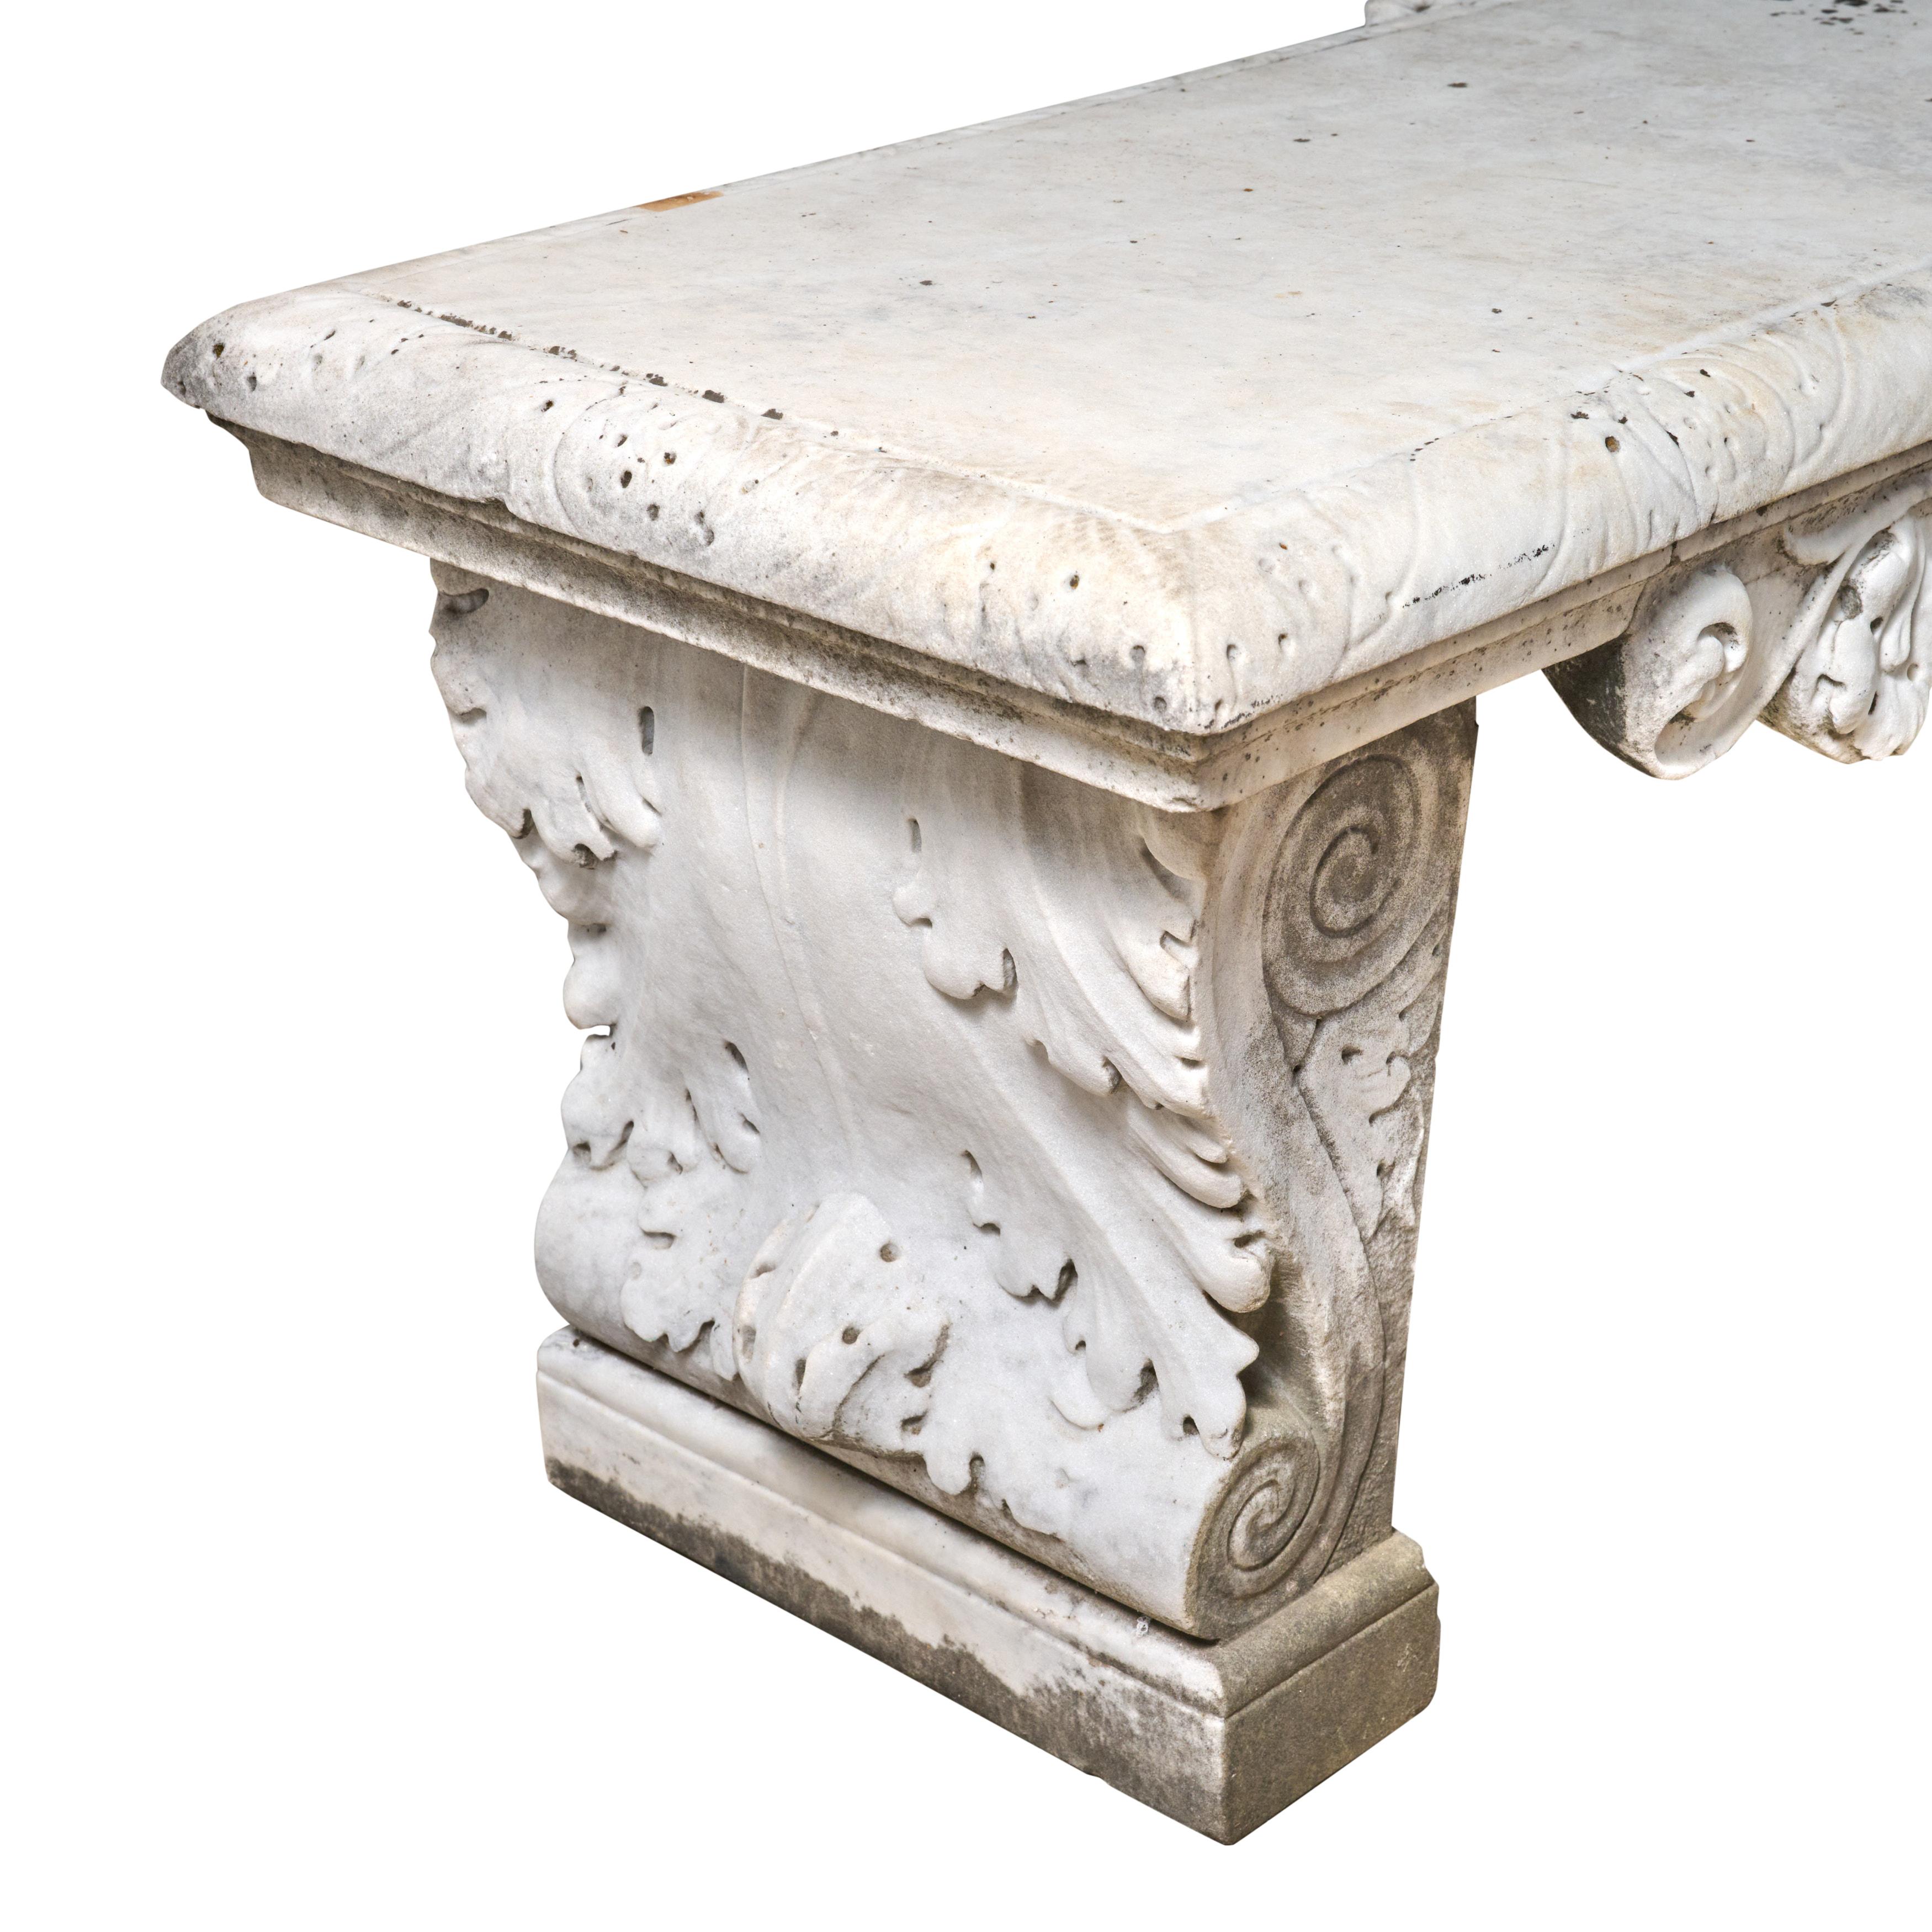 Early 20th Century American Heavily Carved Marble Bench with Satyr Heads